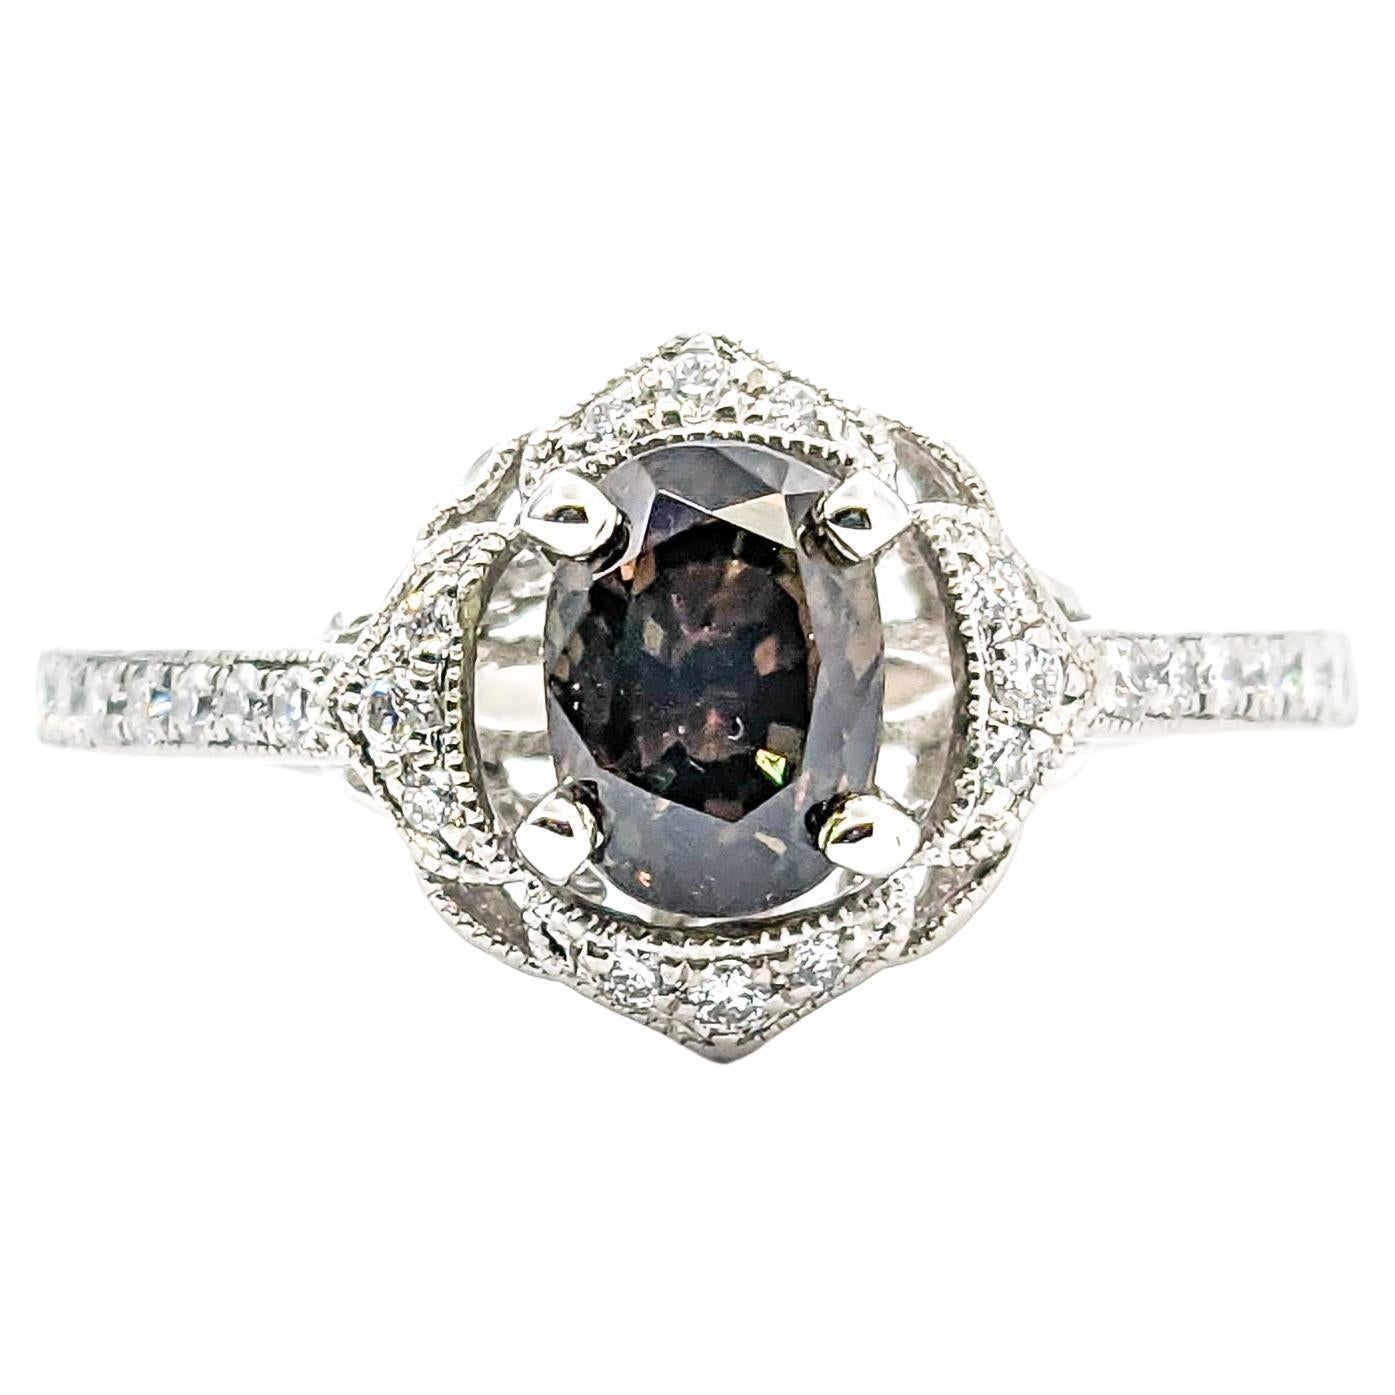 1.23ct Natural Alexandrite & Diamond Ring In Platinum

Discover the exceptional beauty of our ring, masterfully crafted in platinum. This exquisite piece features a remarkable 1.23ct GIA-certified Alexandrite, known for its unique color-changing